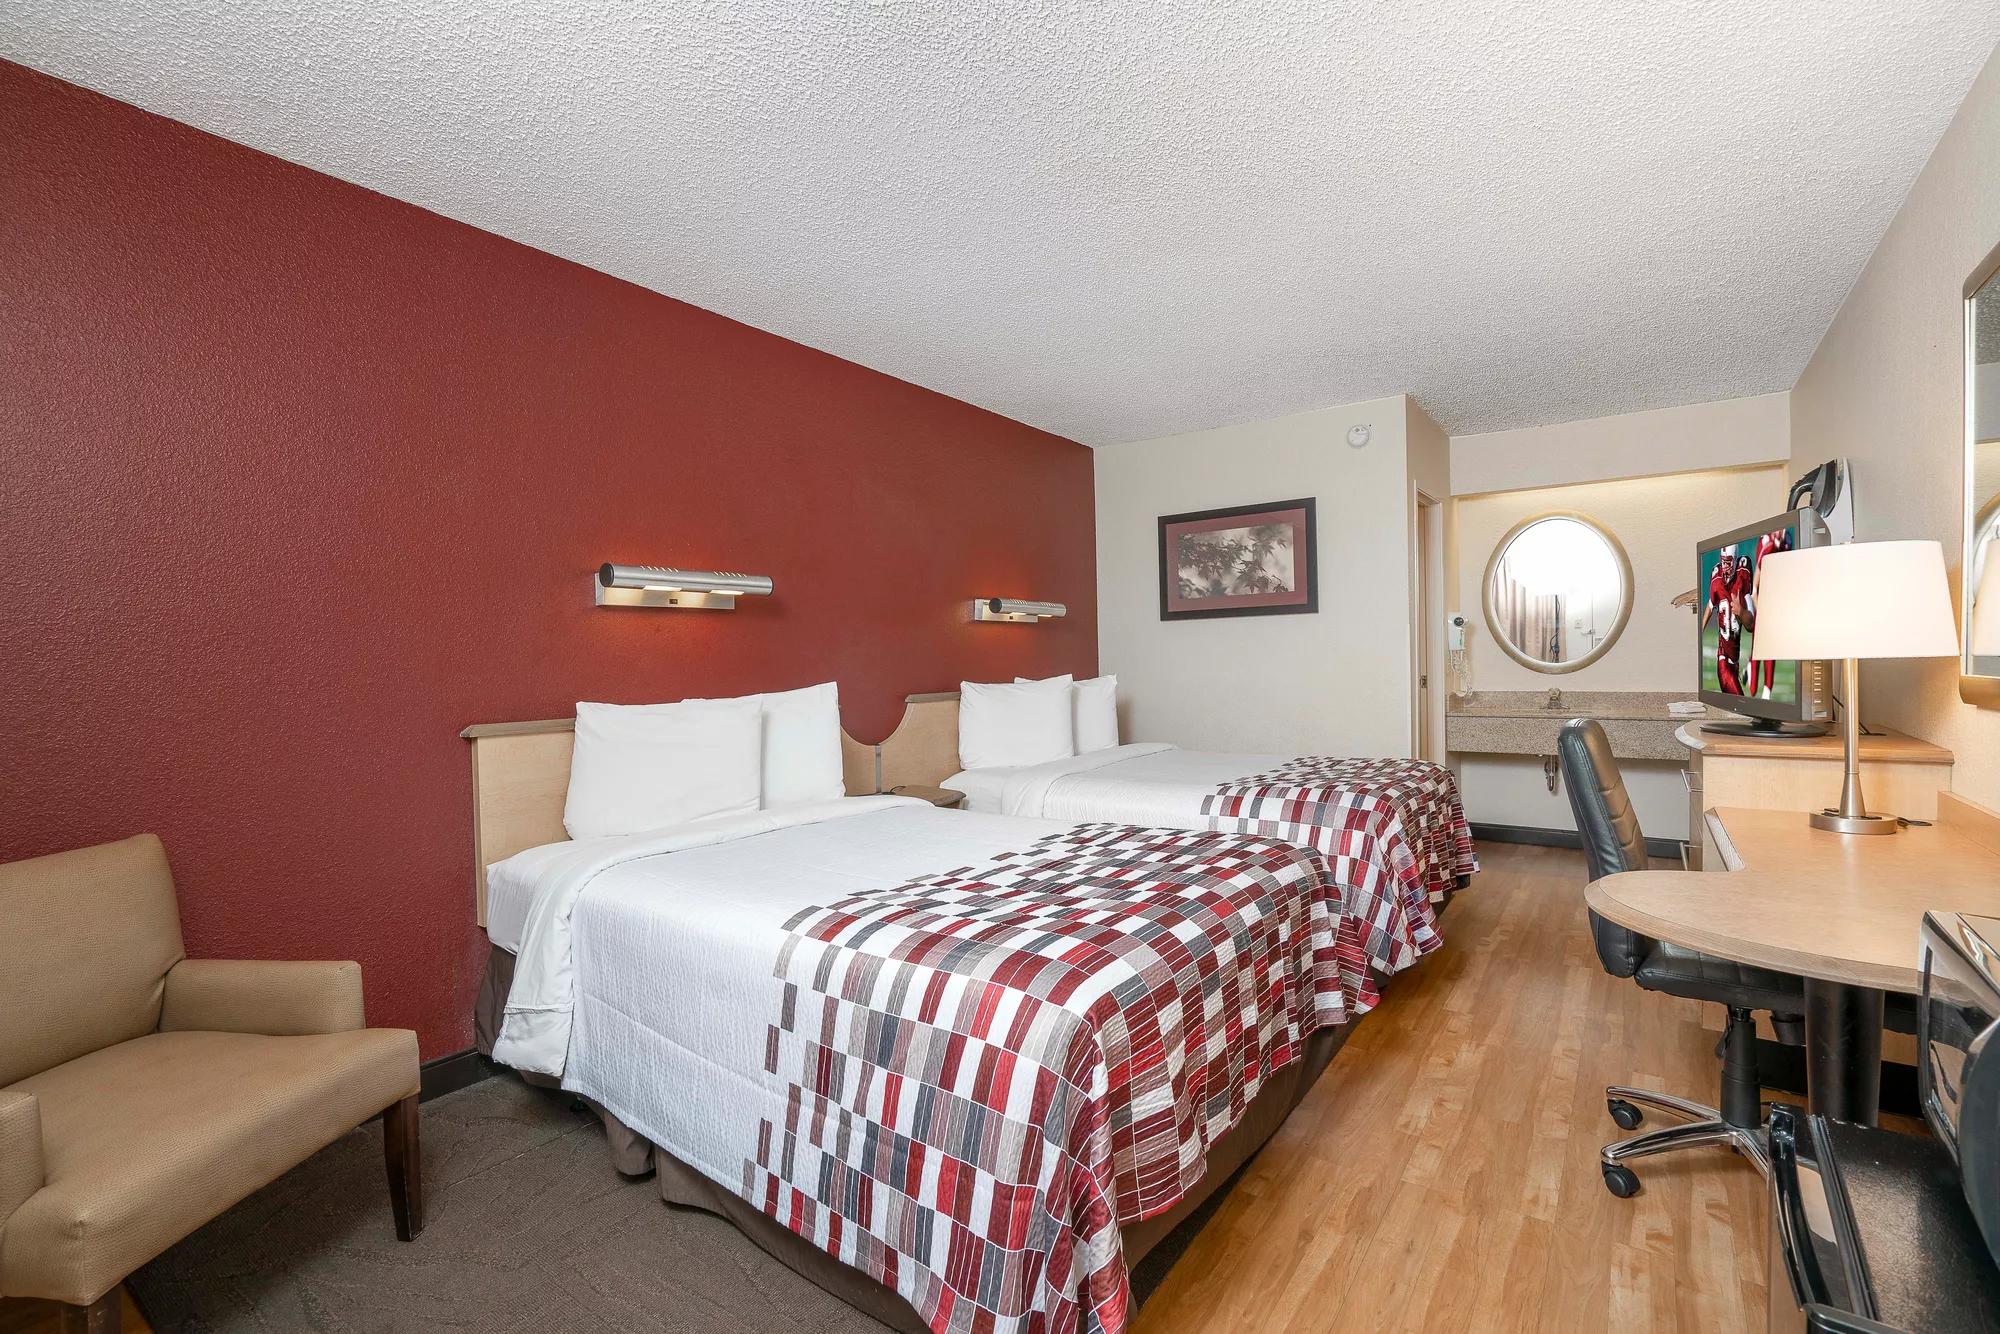 Red Roof Inn Syracuse Deluxe Double Bed Room Image Details